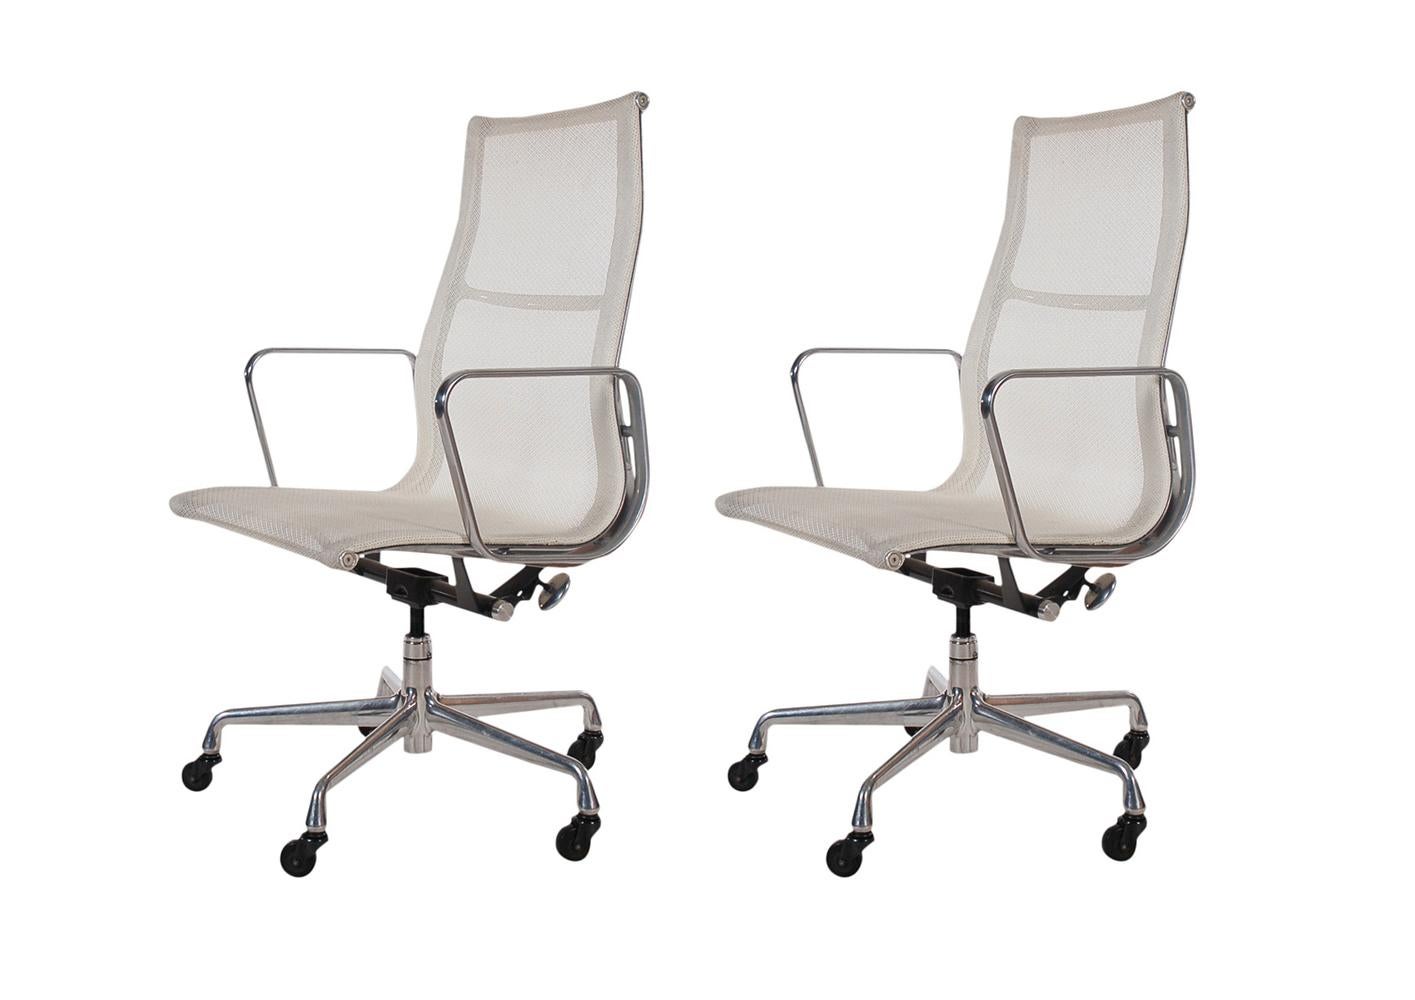 Late 20th Century Pair of Charles Eames for Herman Miller White Conference Room Office Chairs